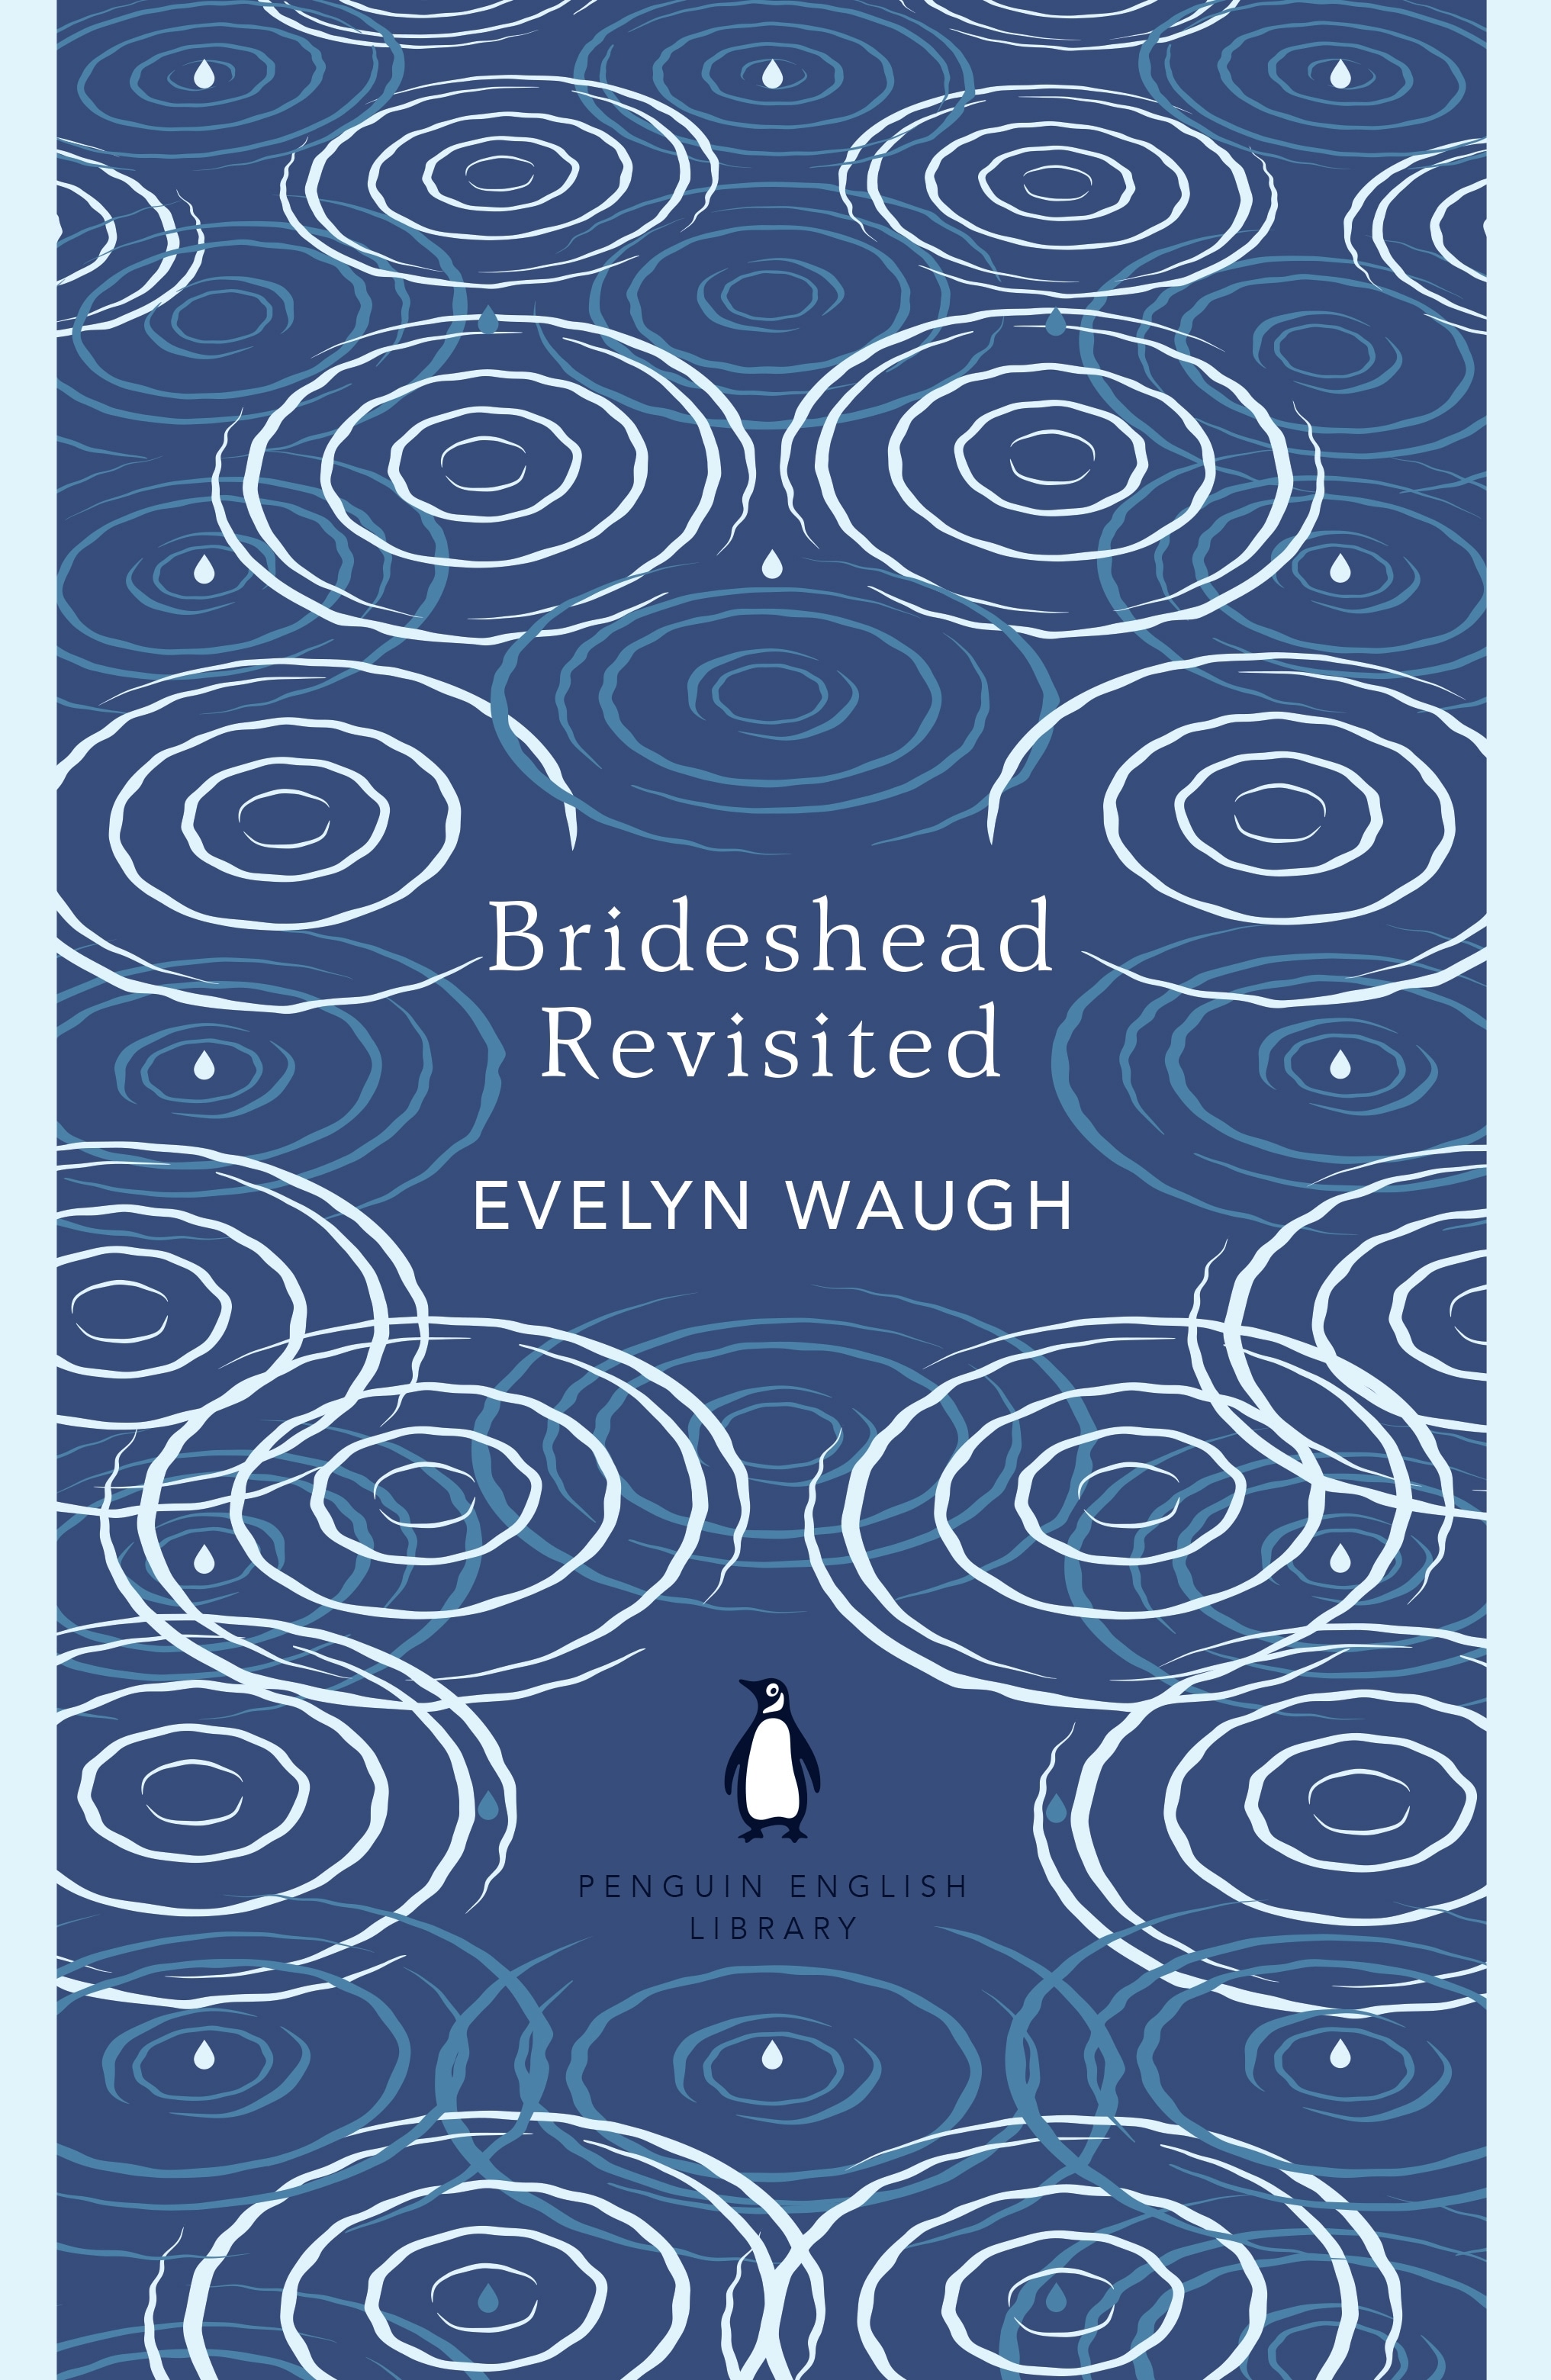 Book “Brideshead Revisited” by Evelyn Waugh — October 1, 2020